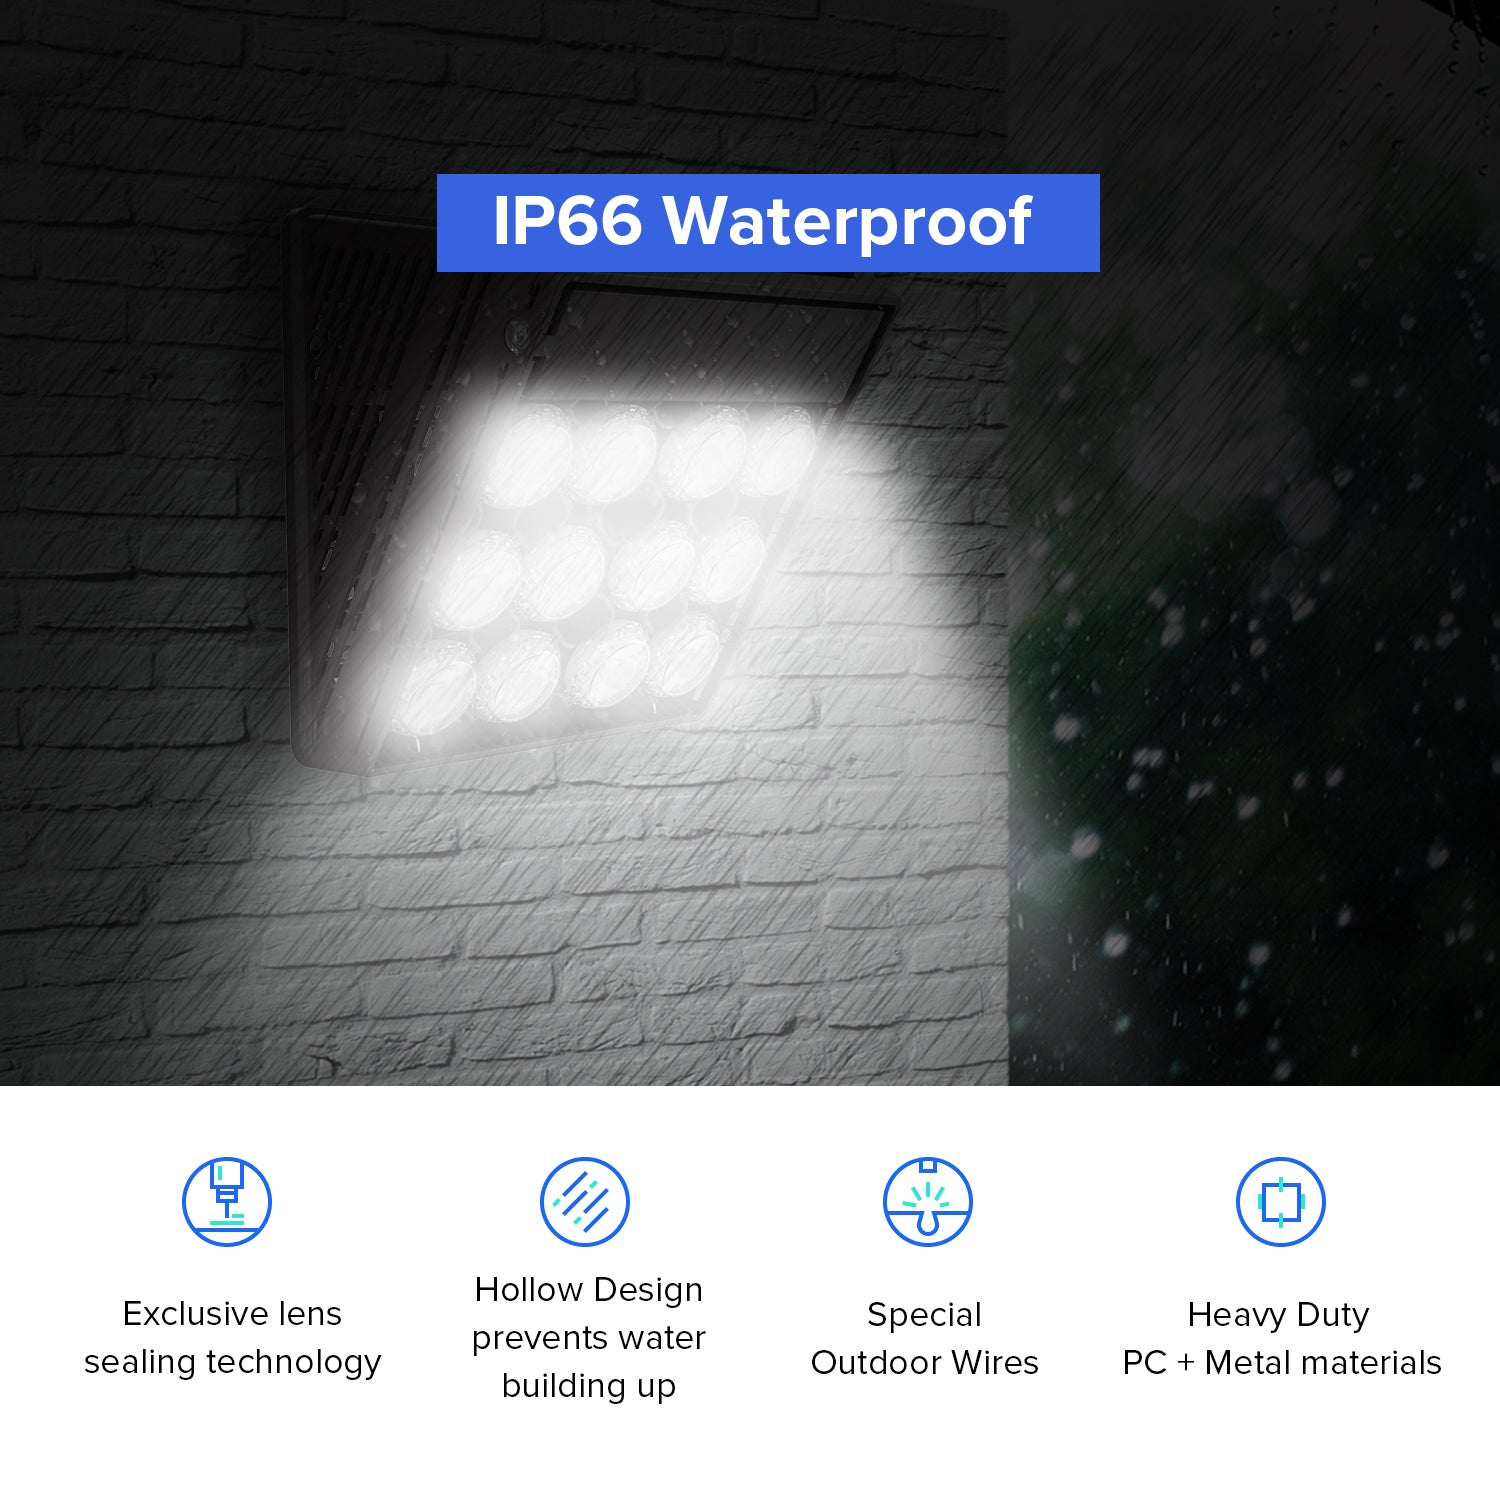 70W LED Wall Pack Light (Dusk to Dawn) is IP66 waterproof.